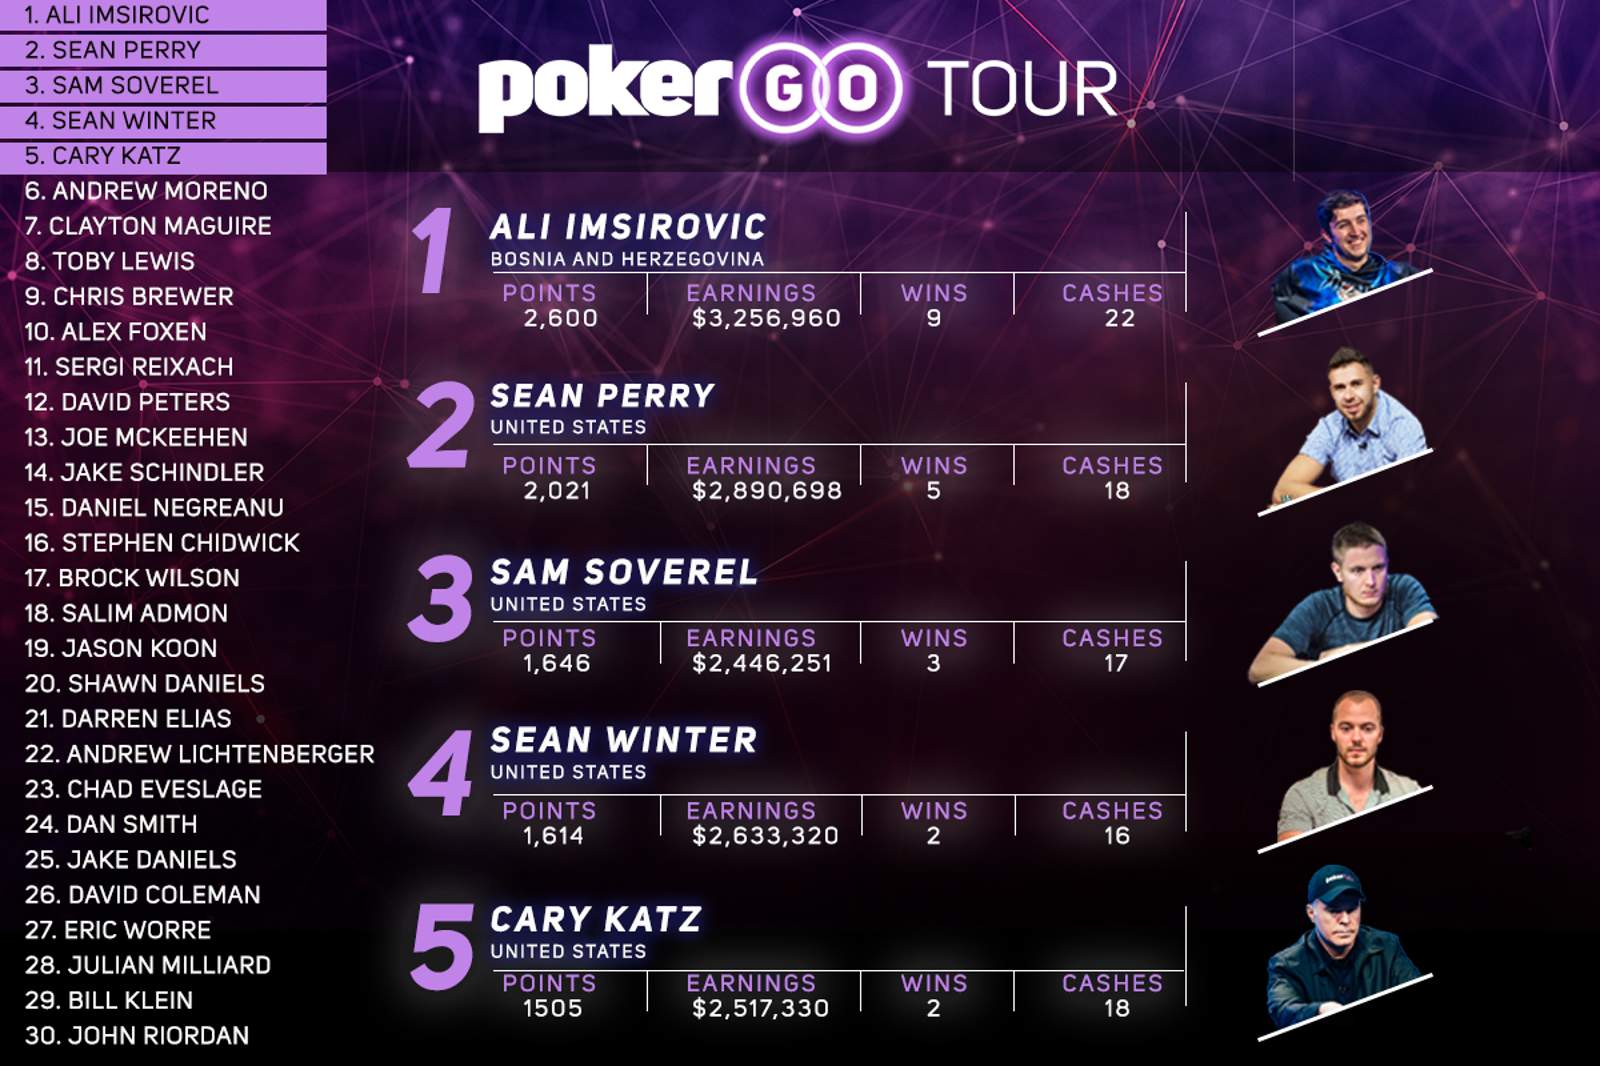 Ali Imsirovic Continues to Hold Top Spot on PokerGO Tour Leaderboard